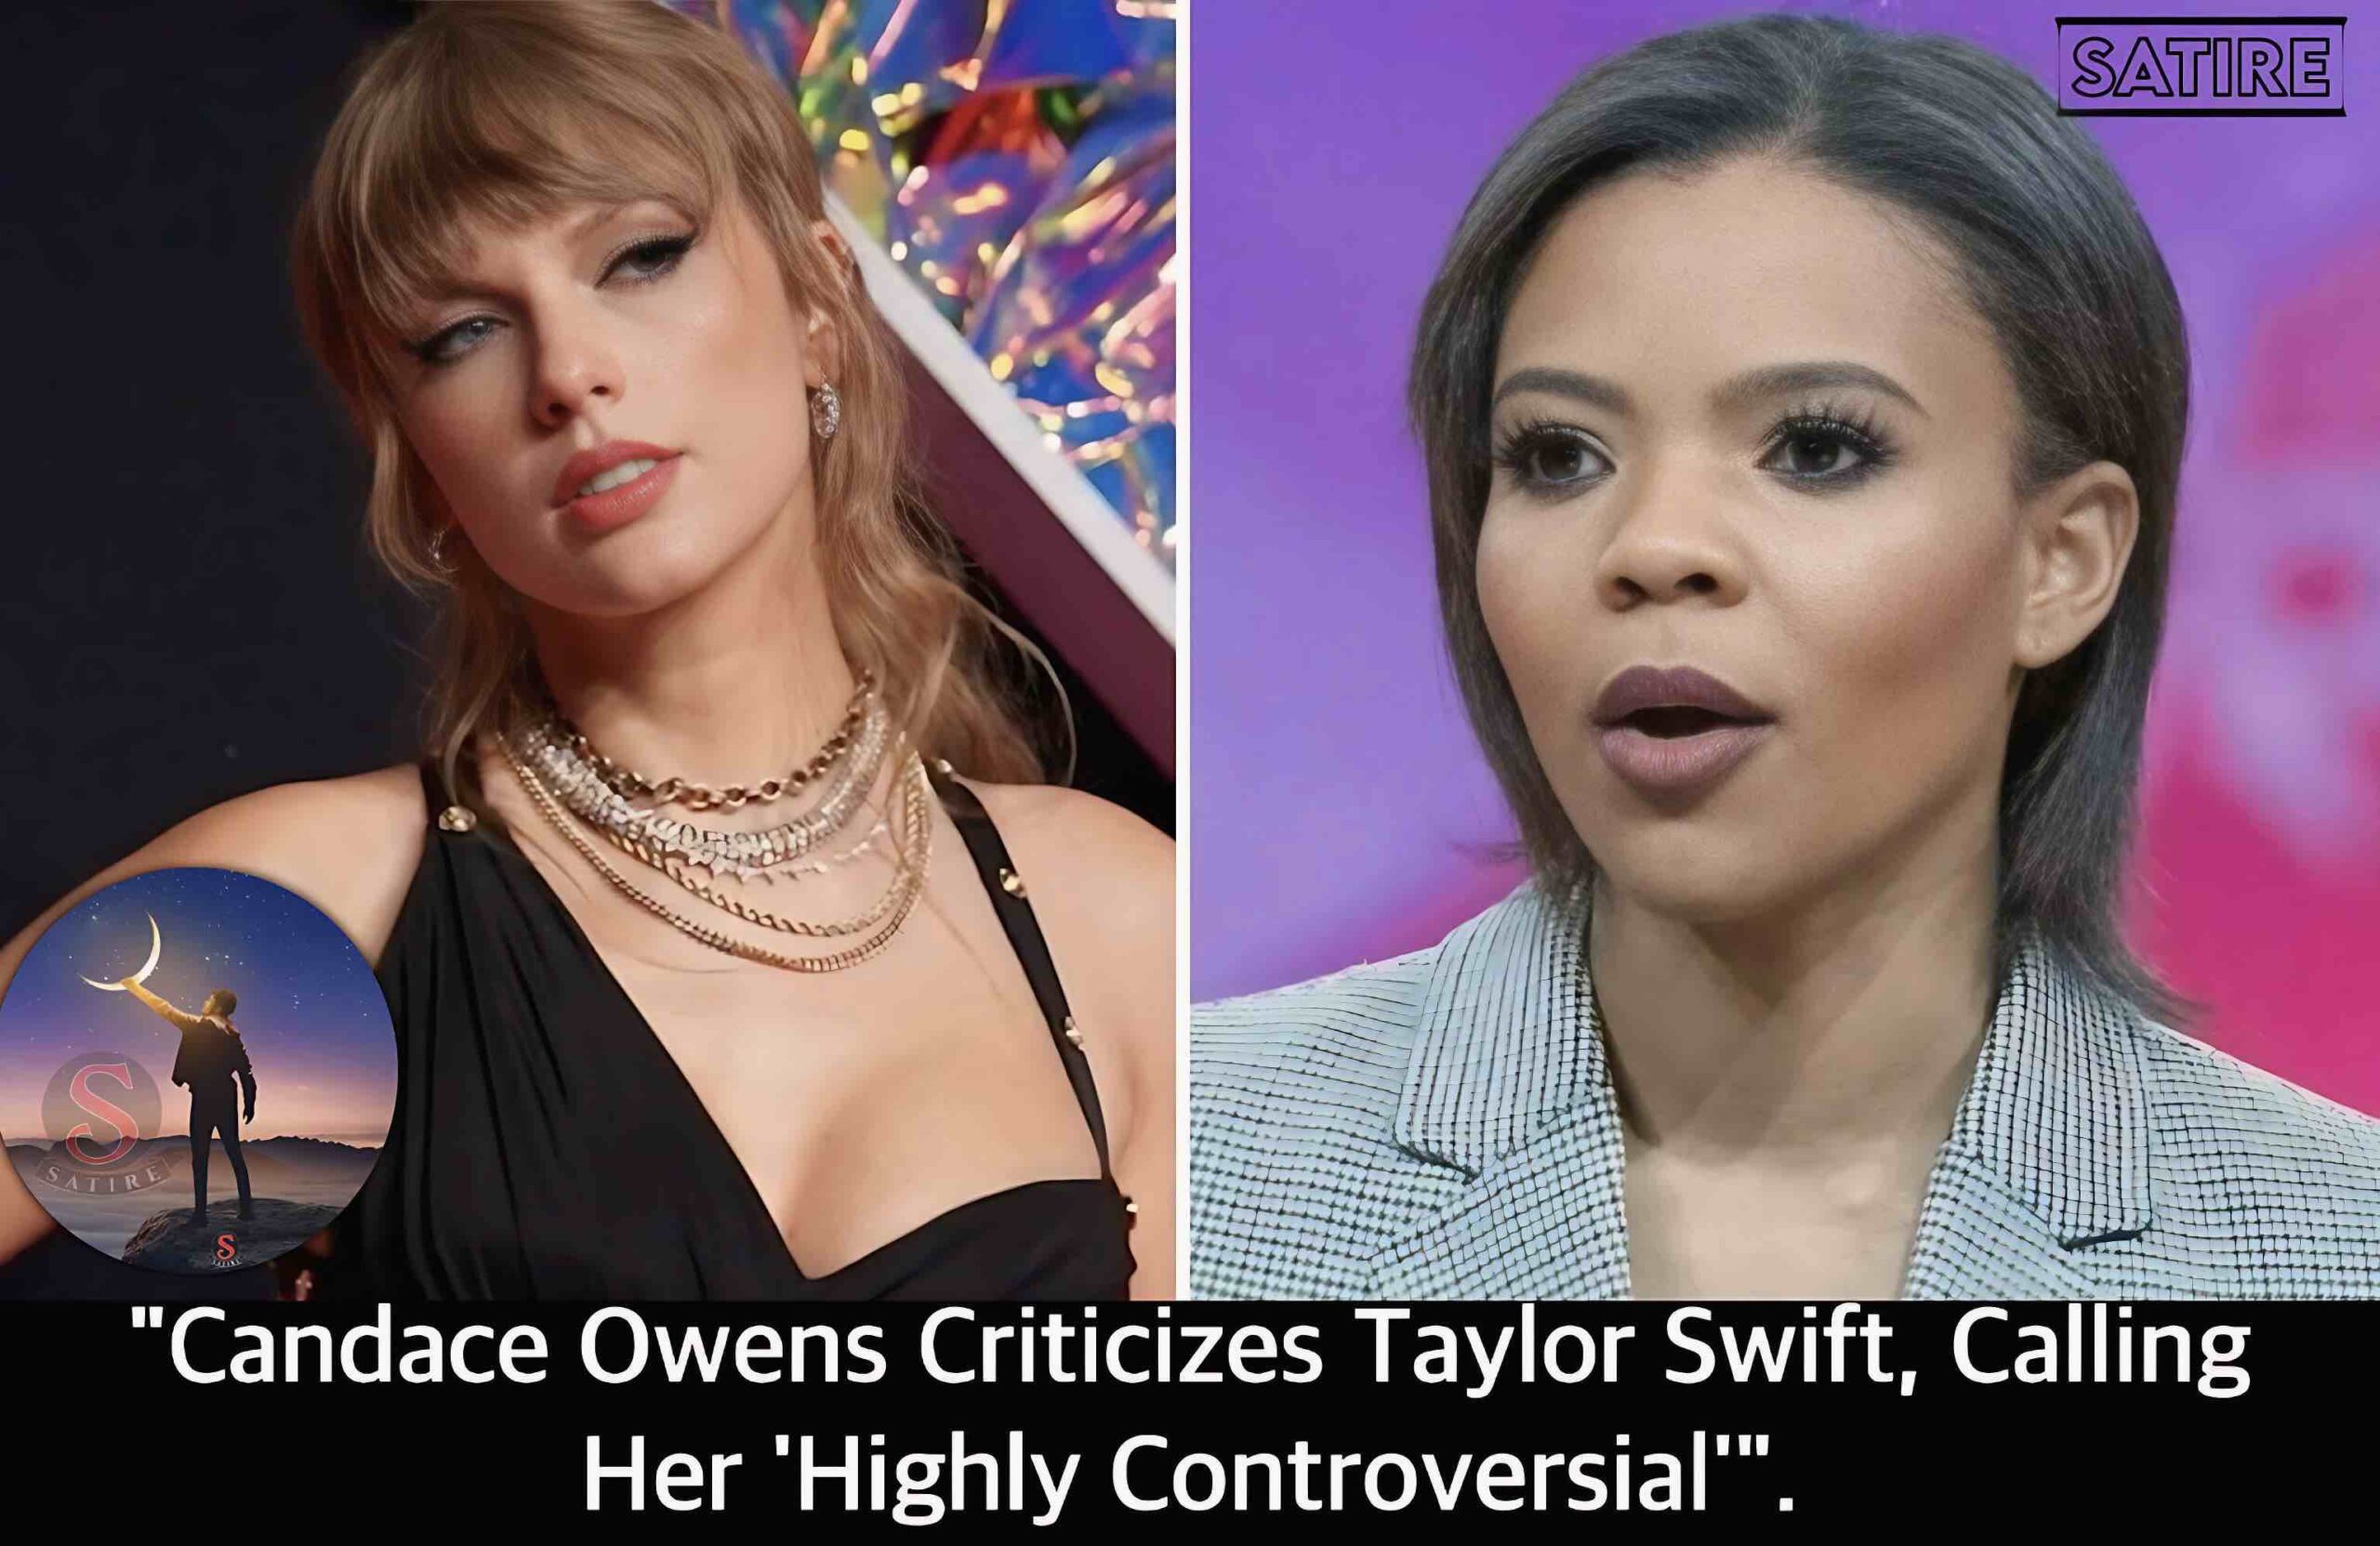 “Candace Owens Criticizes Taylor Swift, Calling Her ‘Highly Controversial'”.